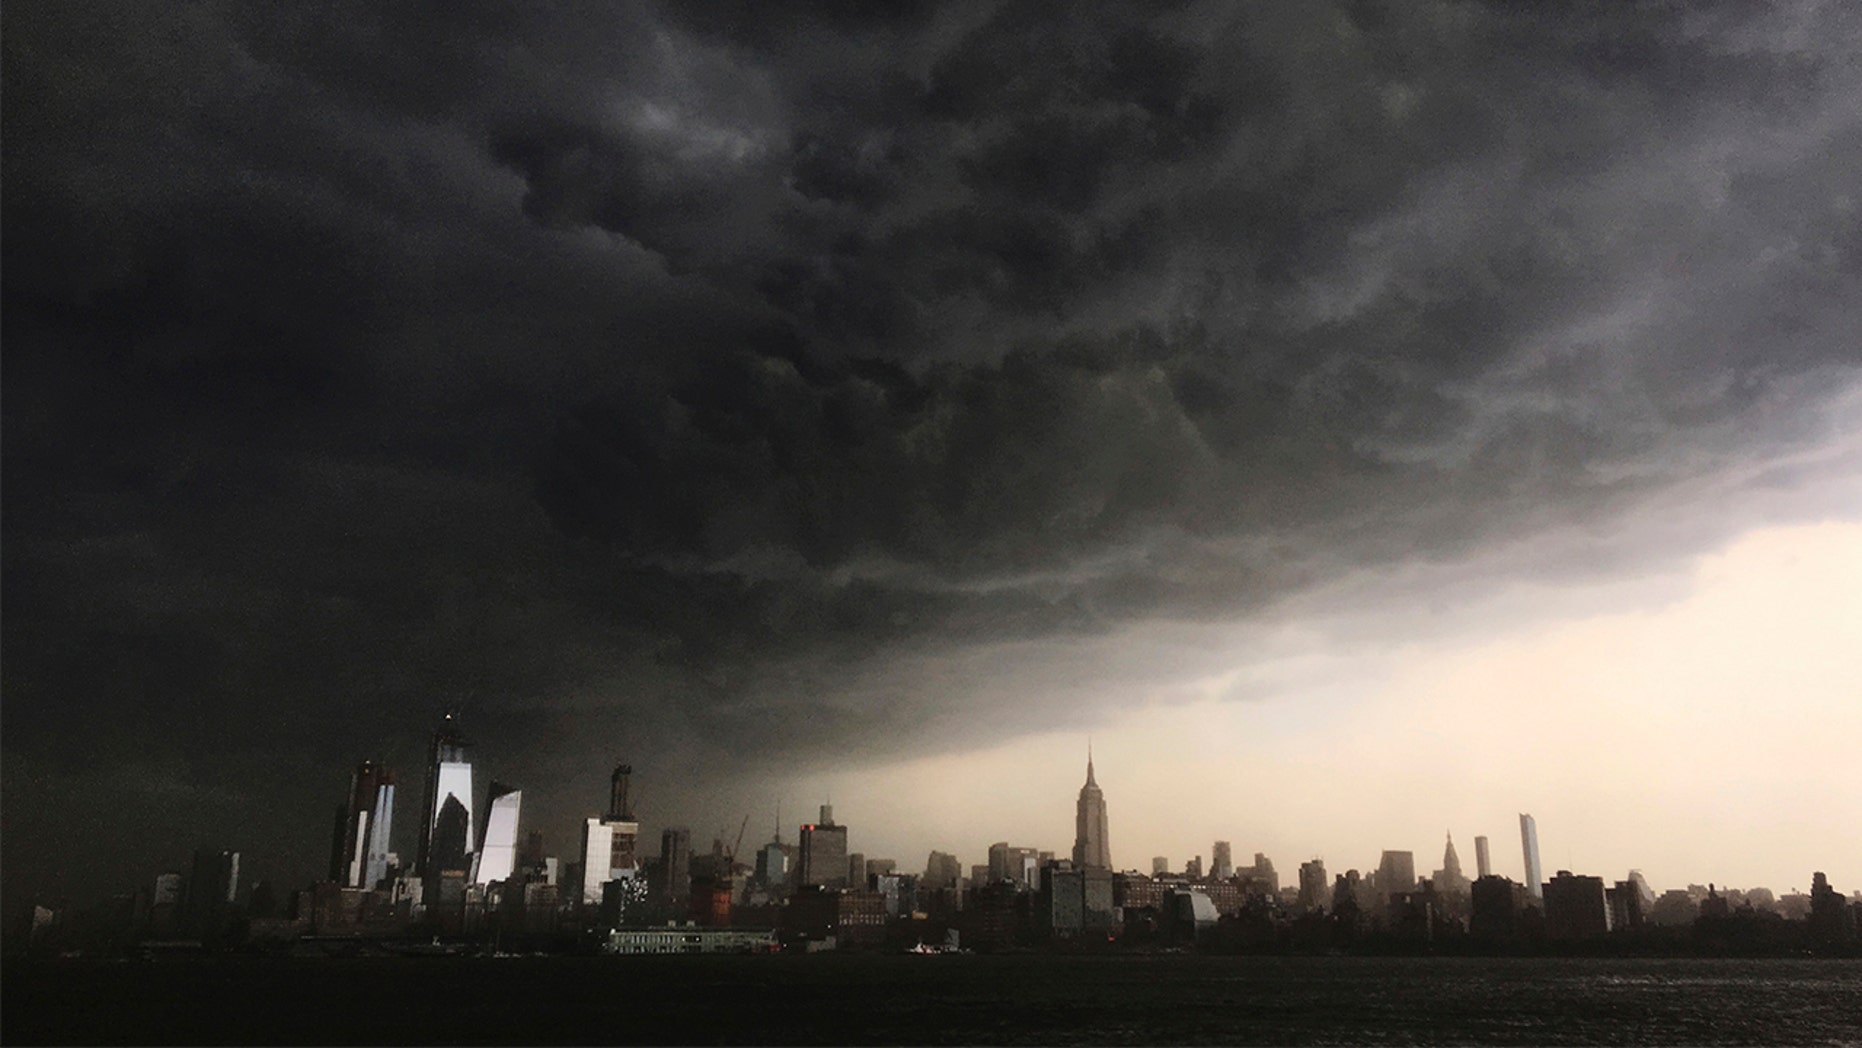 Three Tornadoes Hit Ny Amid Powerful Northeast Storms On Tuesday Nws Says Fox News 4350